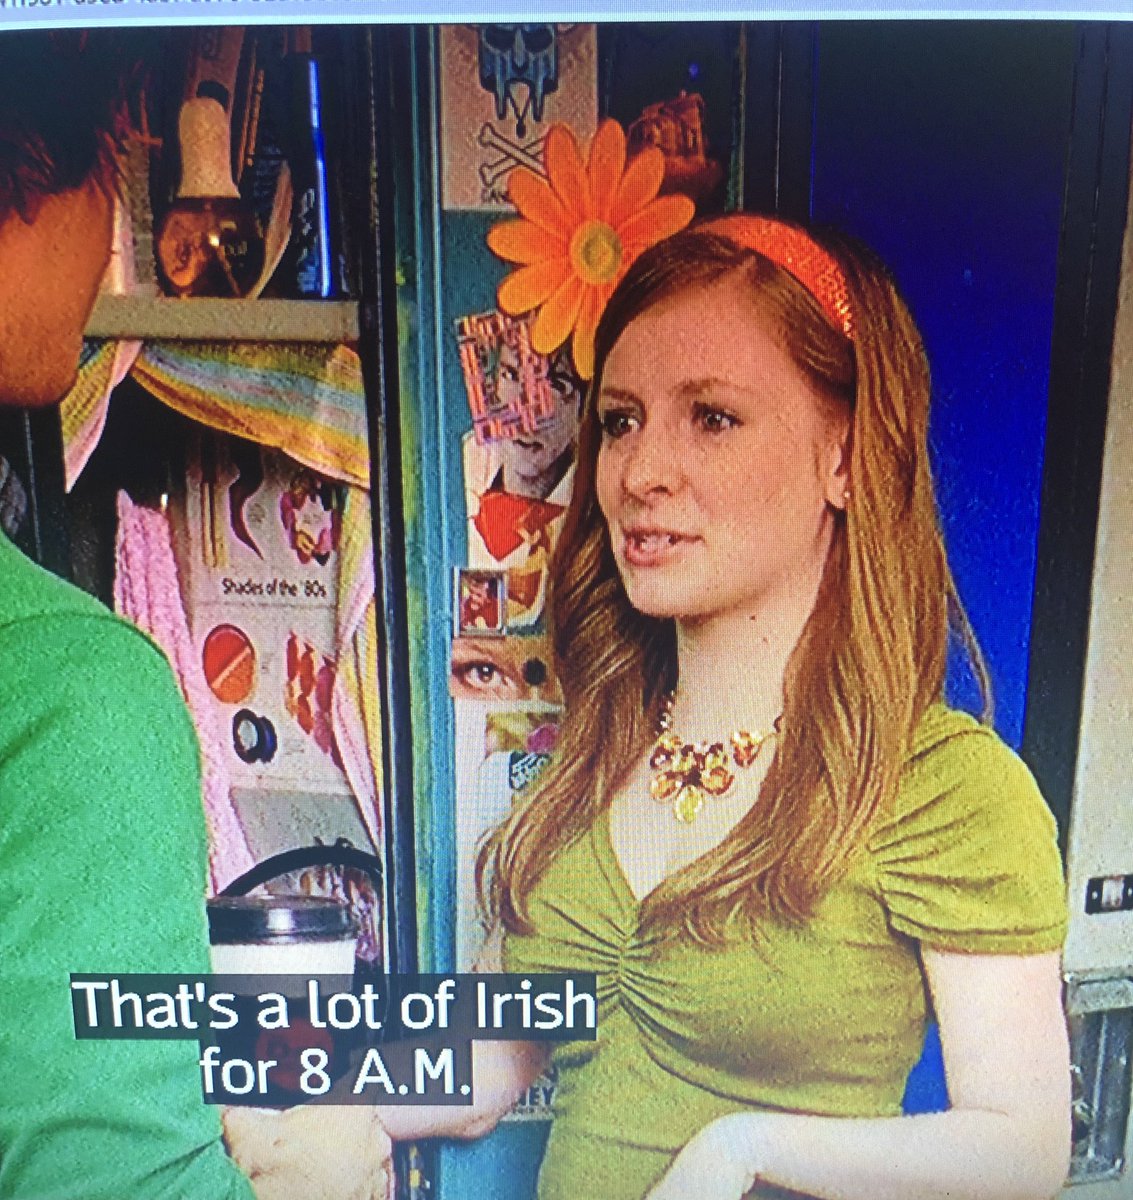 degrassi was just puttin any music posters in the kids rooms/lockers like why the fuck does holly j listen to MF DOOM